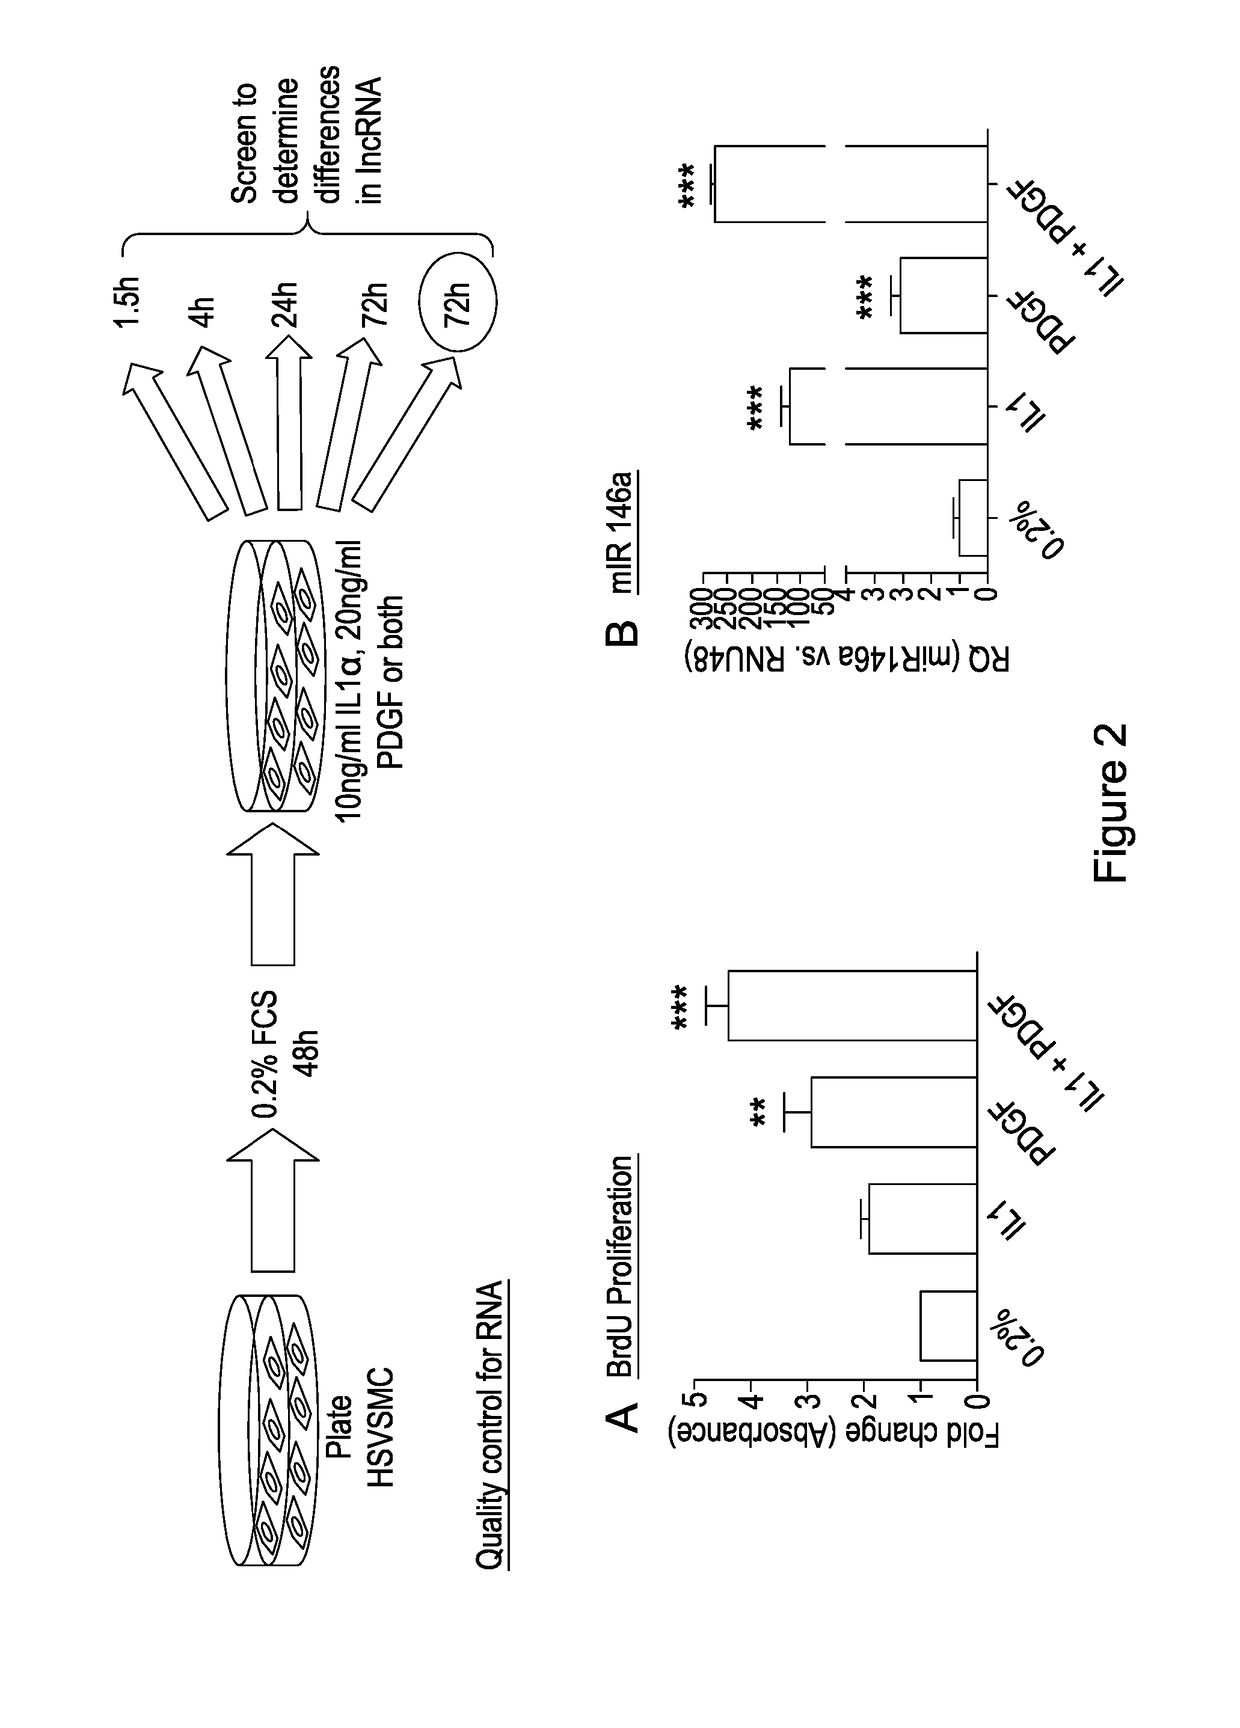 Materials and methods for the treatment of vascular disease